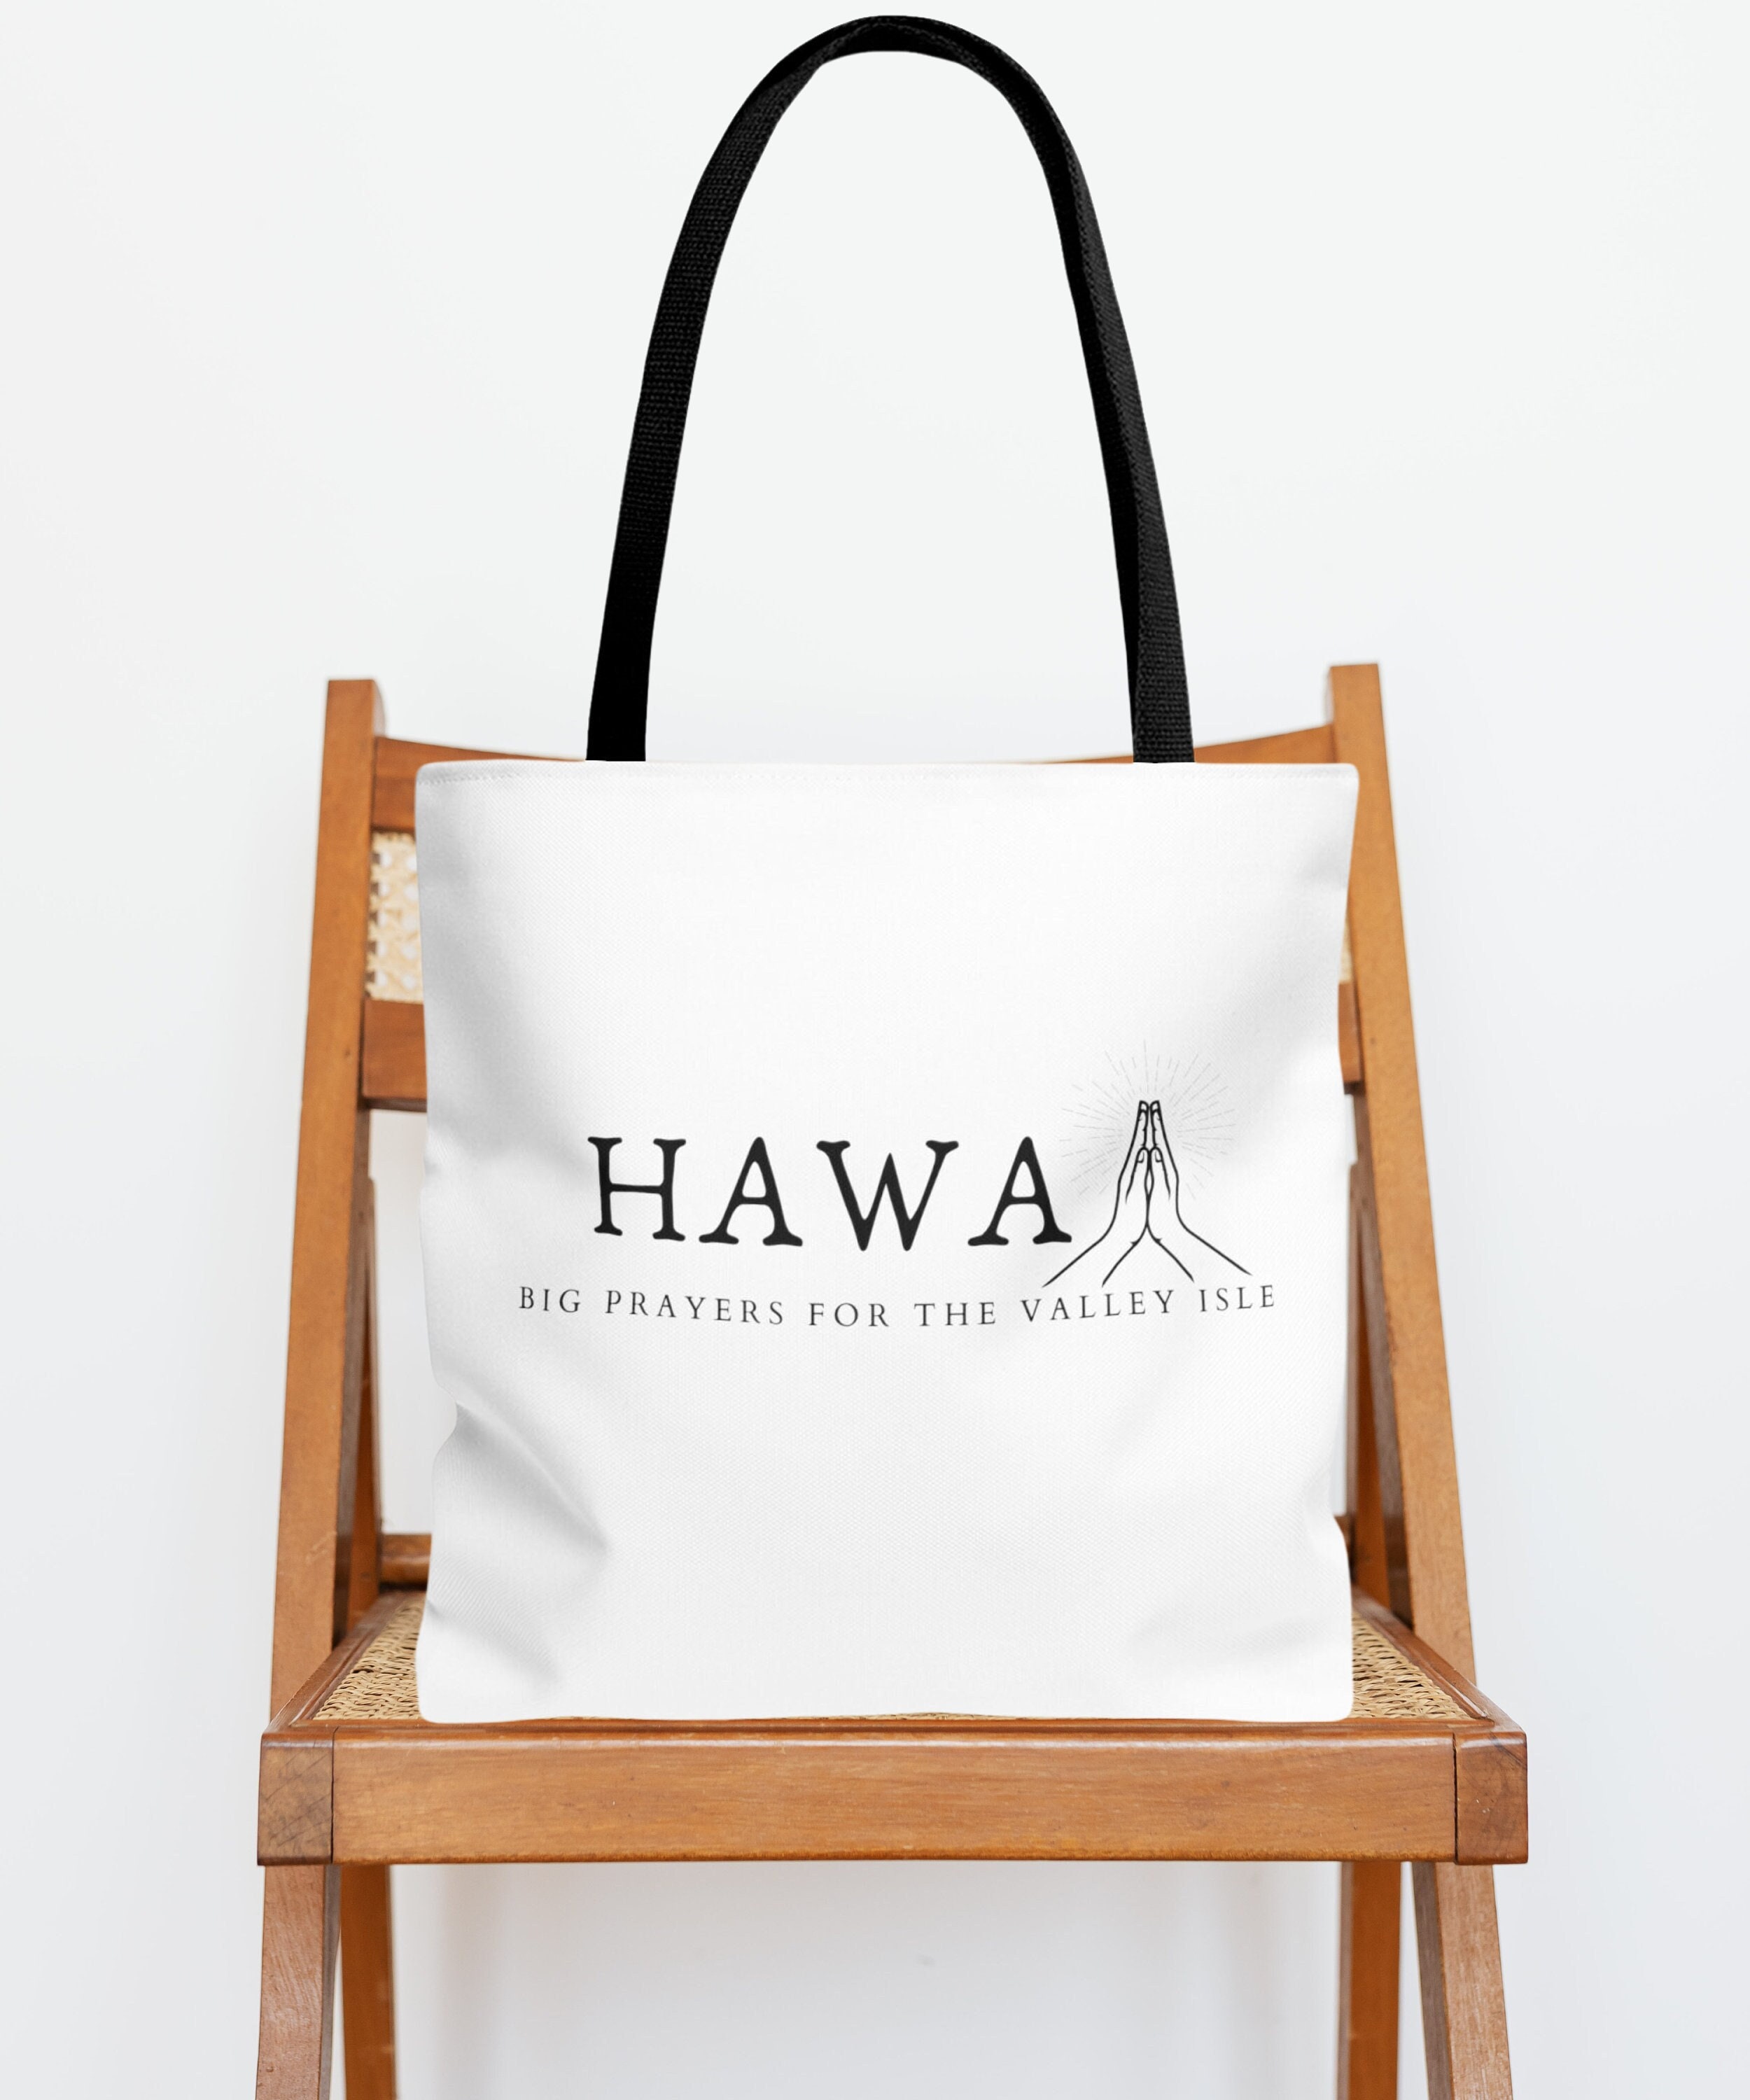 Personalised Cotton Bags for Schools - Great Fundraising IdeaTextile Design  & Print UK